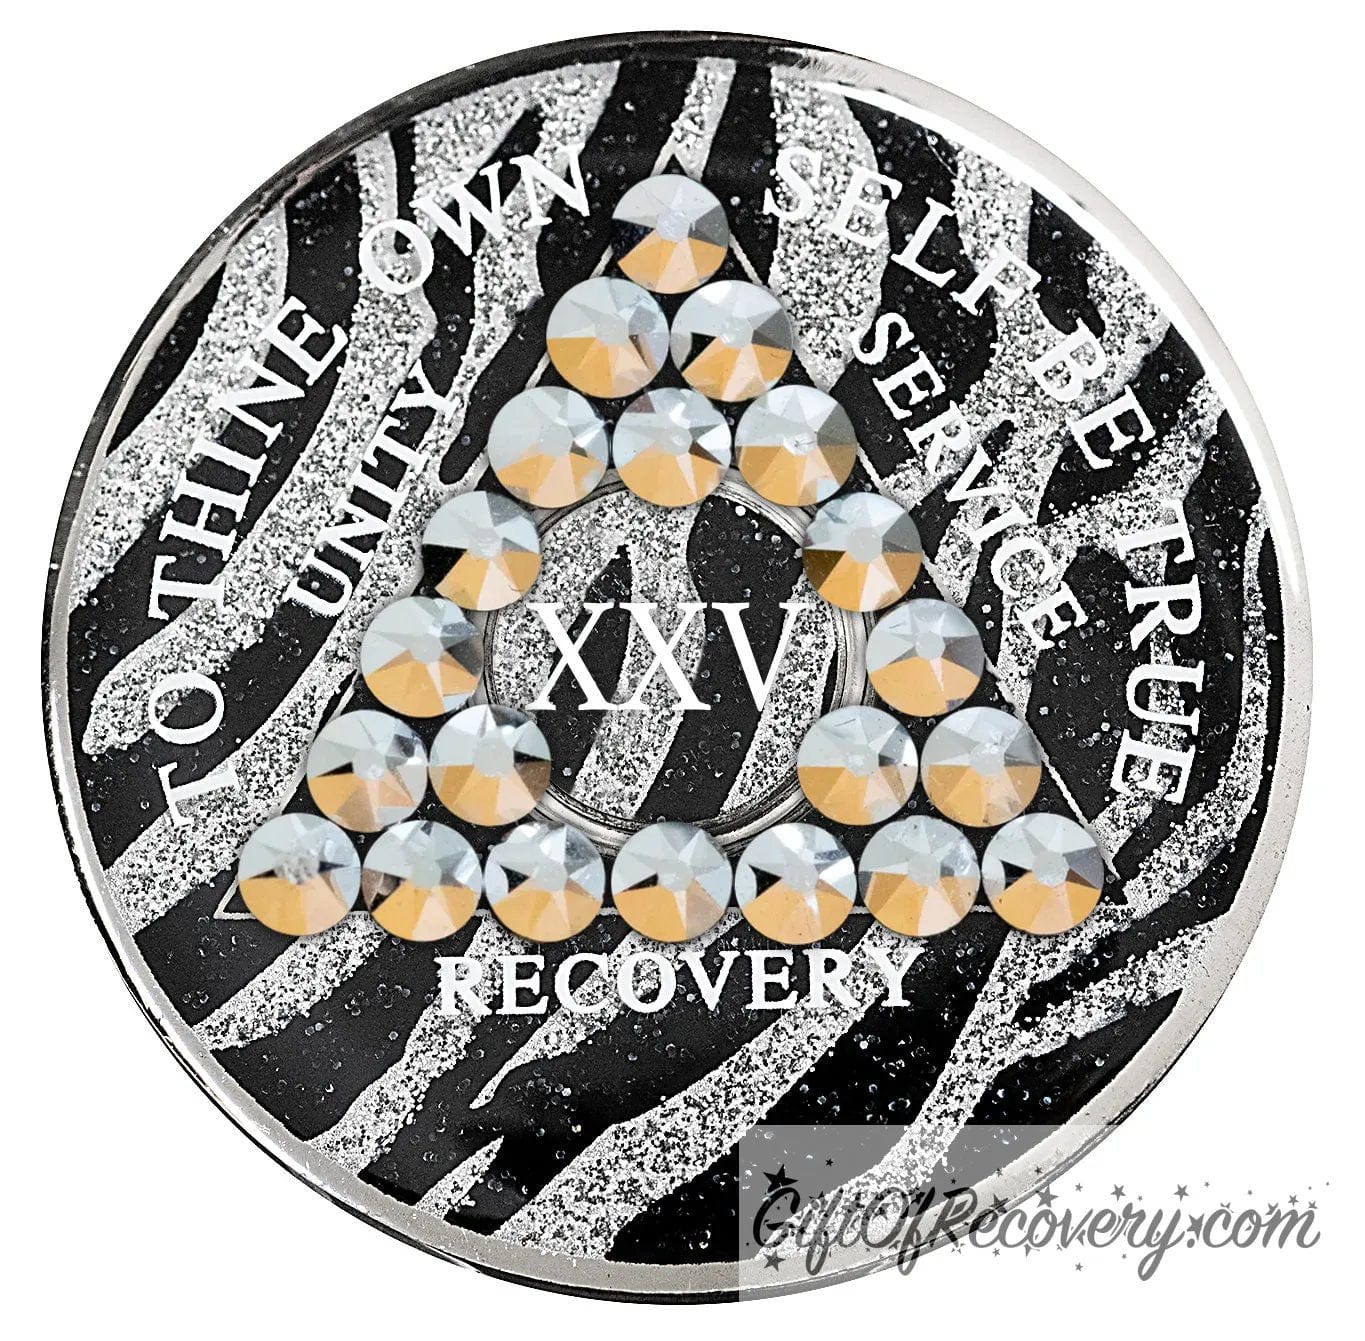 25 Year zebra glitter print, black and silver, AA medallion with 21 genuine comet crystals in a triangle around the year, the lettering unity, service, recovery, the 1 year and To Thine Own Self Be True are in white and the recovery medallion rim is silver.